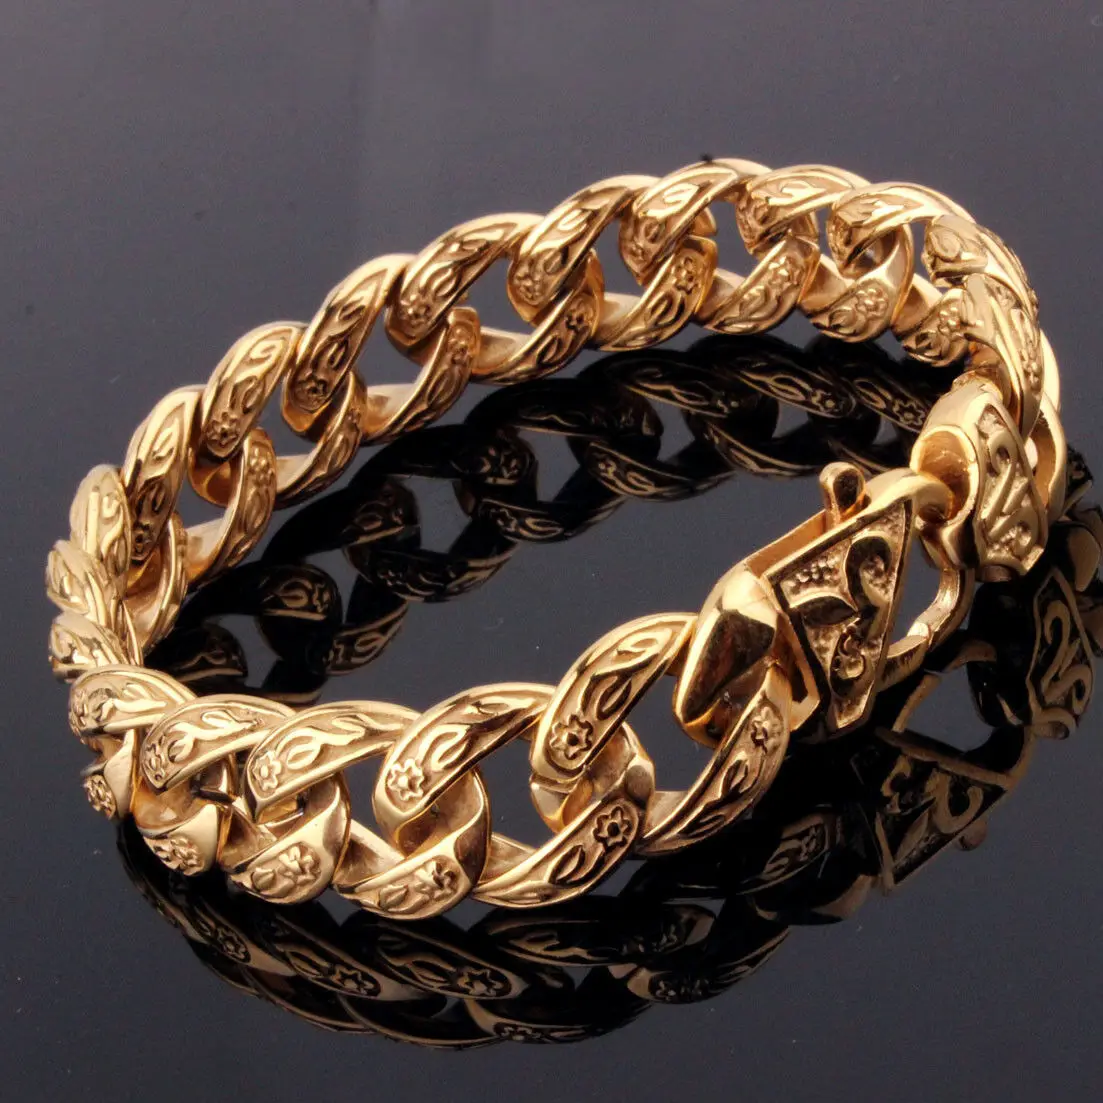 

Granny Chic Men's 15MM Cuban Link Chain Bracelet Gold Tone 316L Stainless Steel Chain Jewelry for Hip Hop Men Women 9inch Long